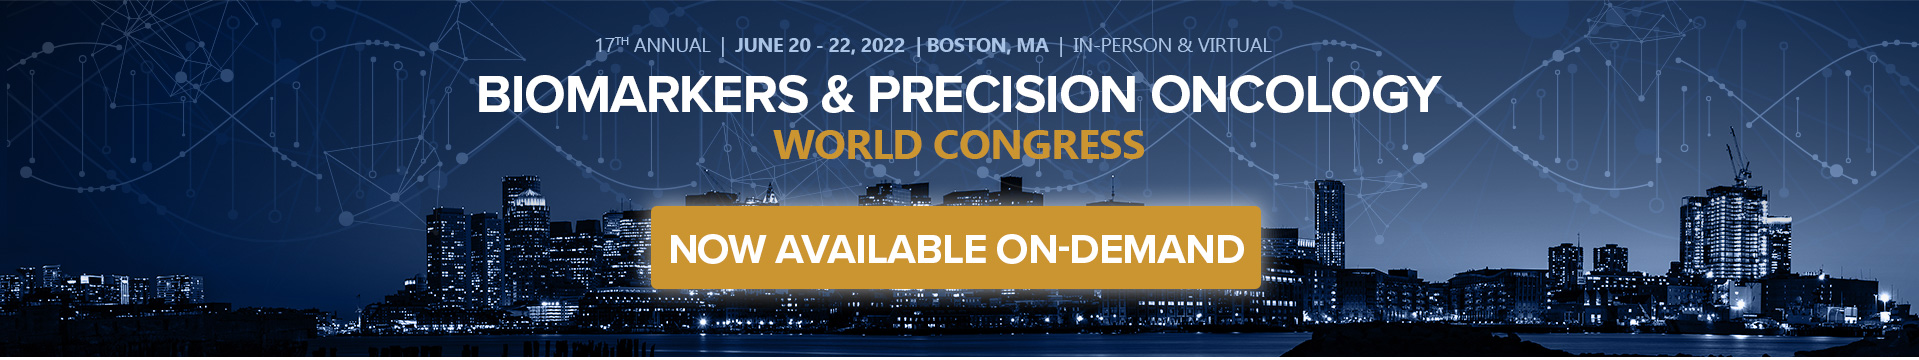 Biomarkers and Precision Oncology World Congress